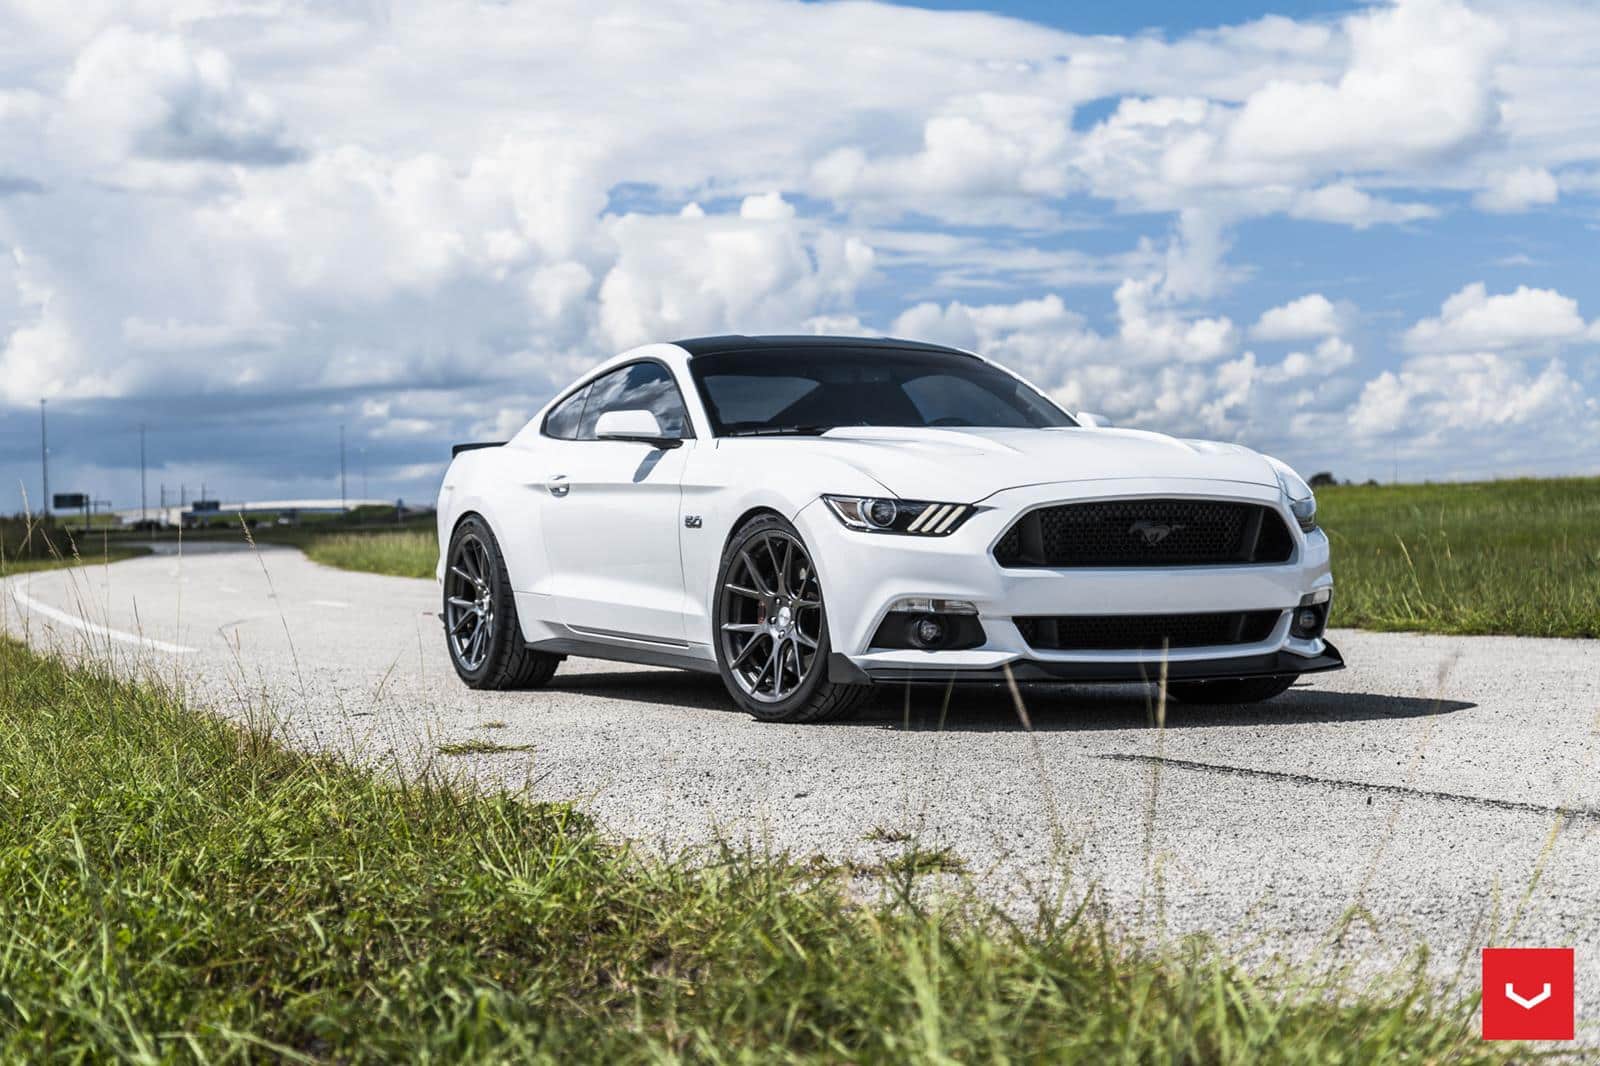 oxford-white-ford-mustang-gtpp-s550-vossen-vfs6-gloss-graphite-concave-hybrid-forged-wheels.jpg